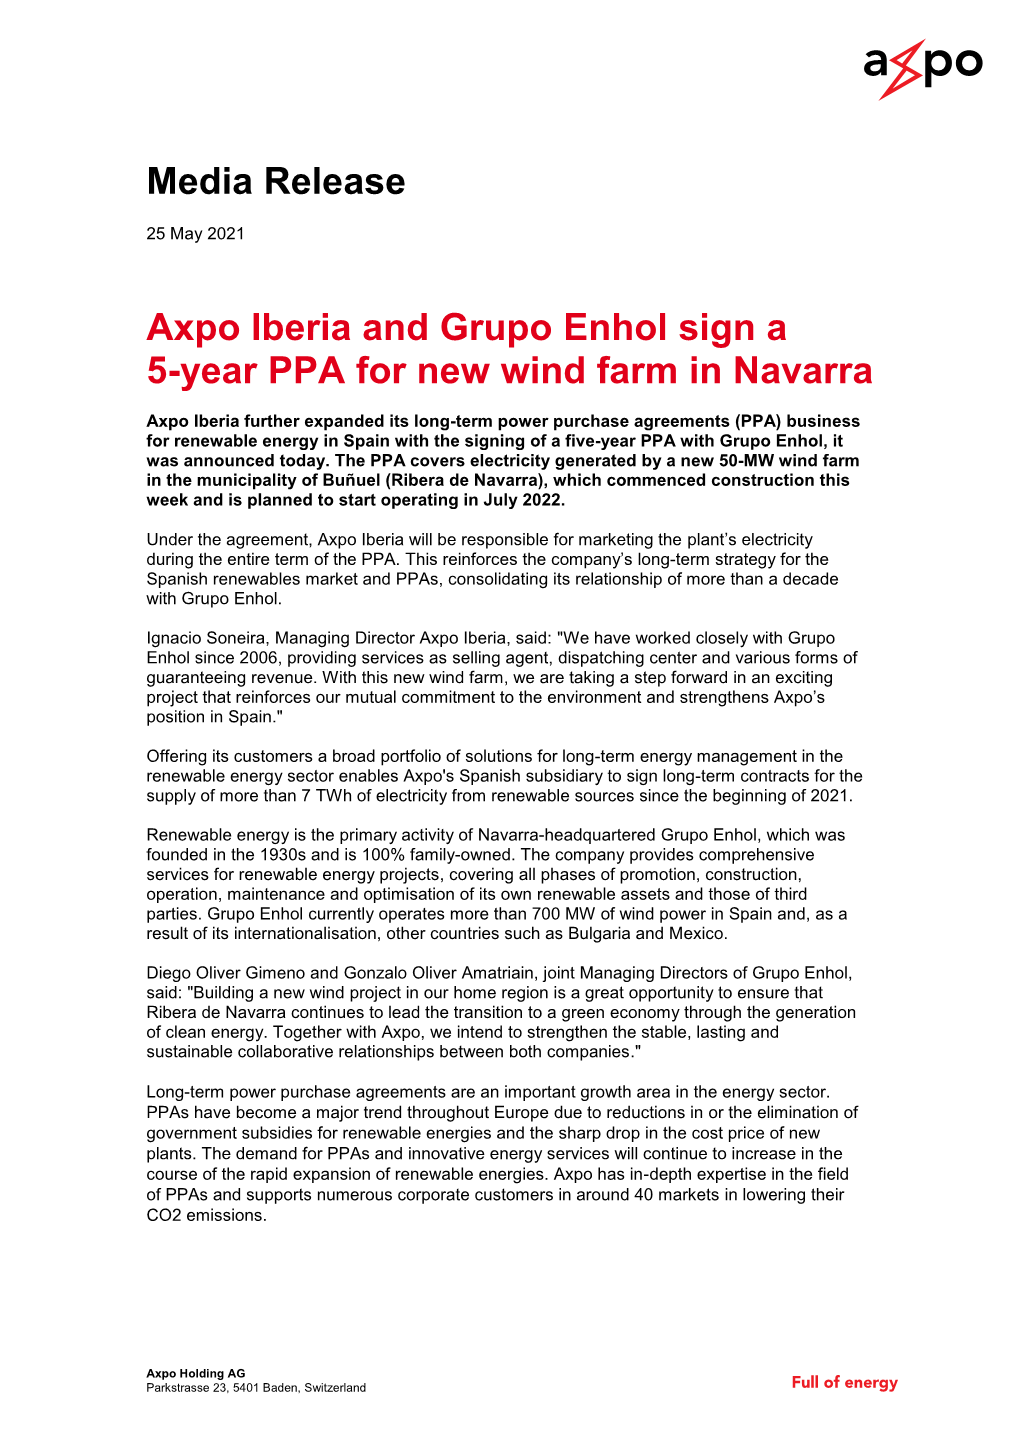 Media Release Axpo Iberia and Grupo Enhol Sign a 5-Year PPA for New